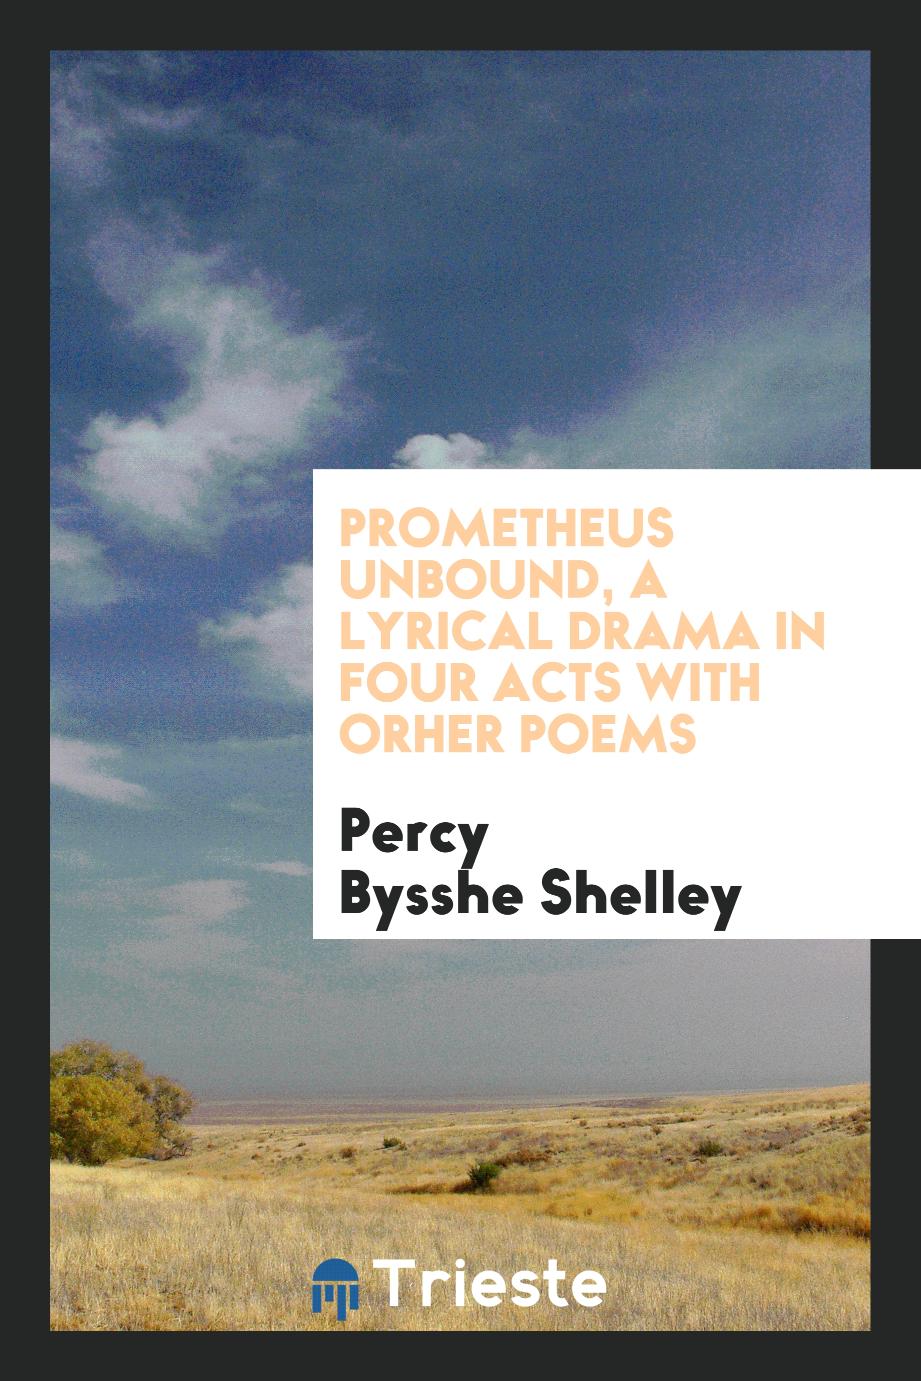 Prometheus unbound, a lyrical drama in four acts with orher poems